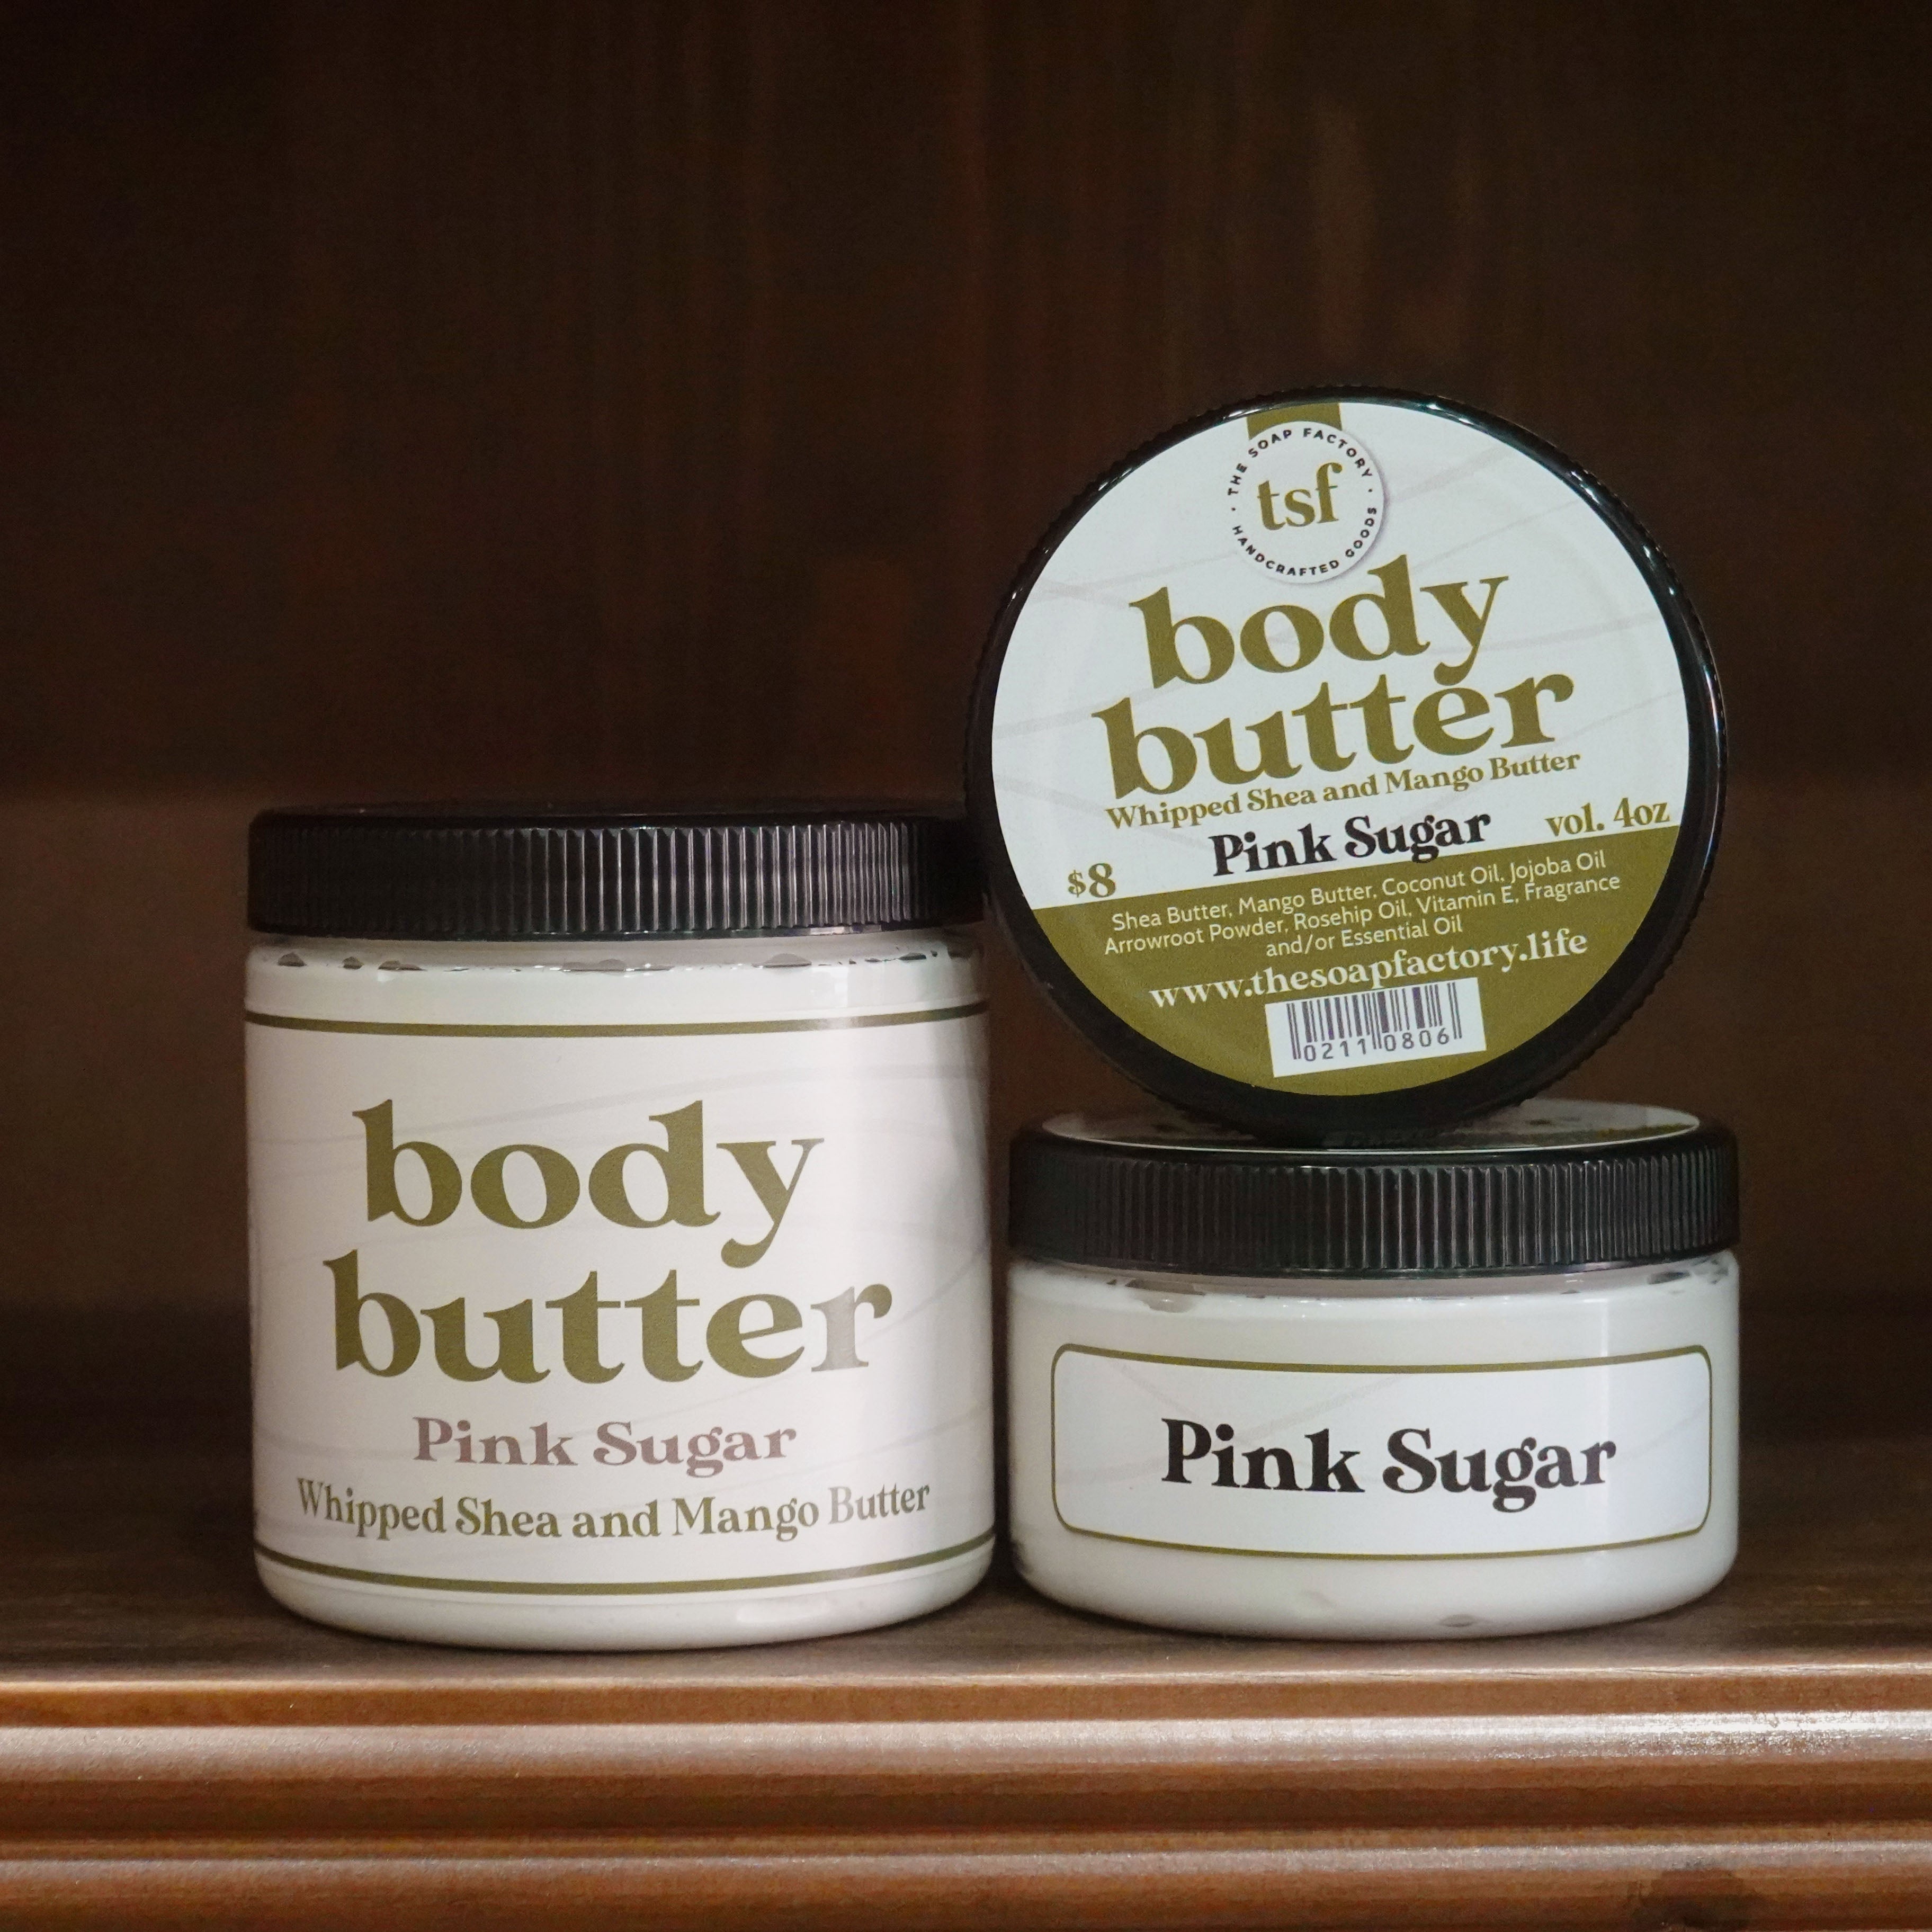 PINK SUGAR BODY OIL | Peacock Butter